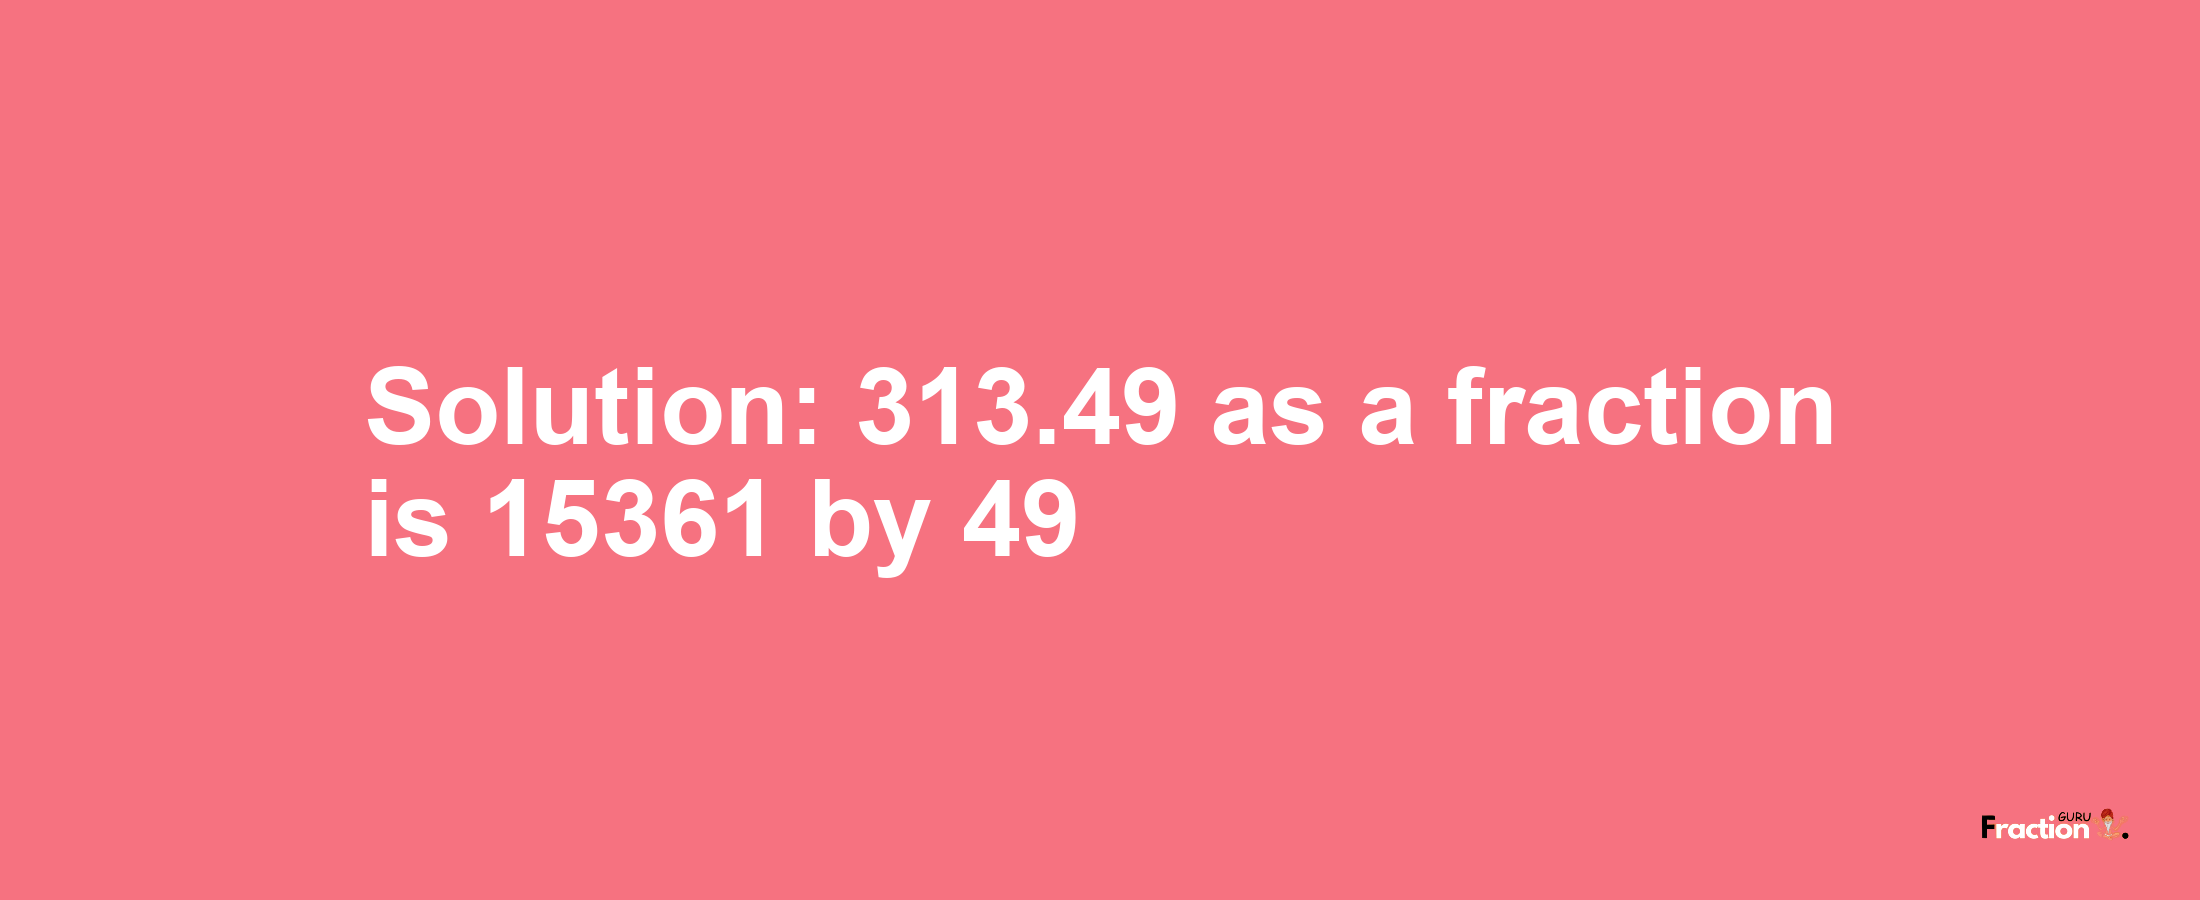 Solution:313.49 as a fraction is 15361/49